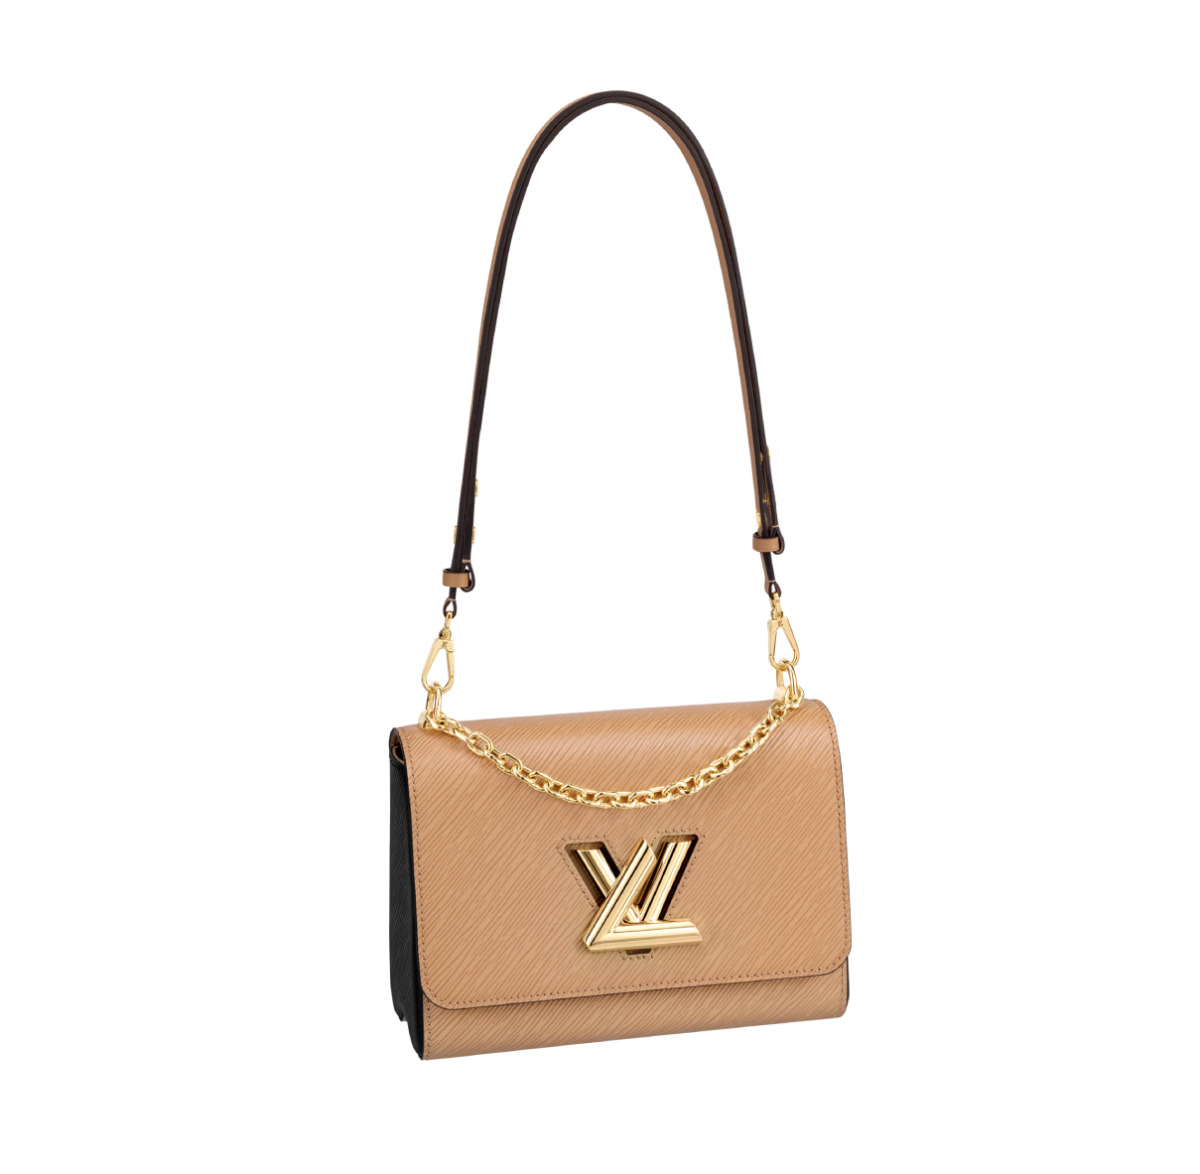 The History of the Louis Vuitton Twist Bag - luxfy